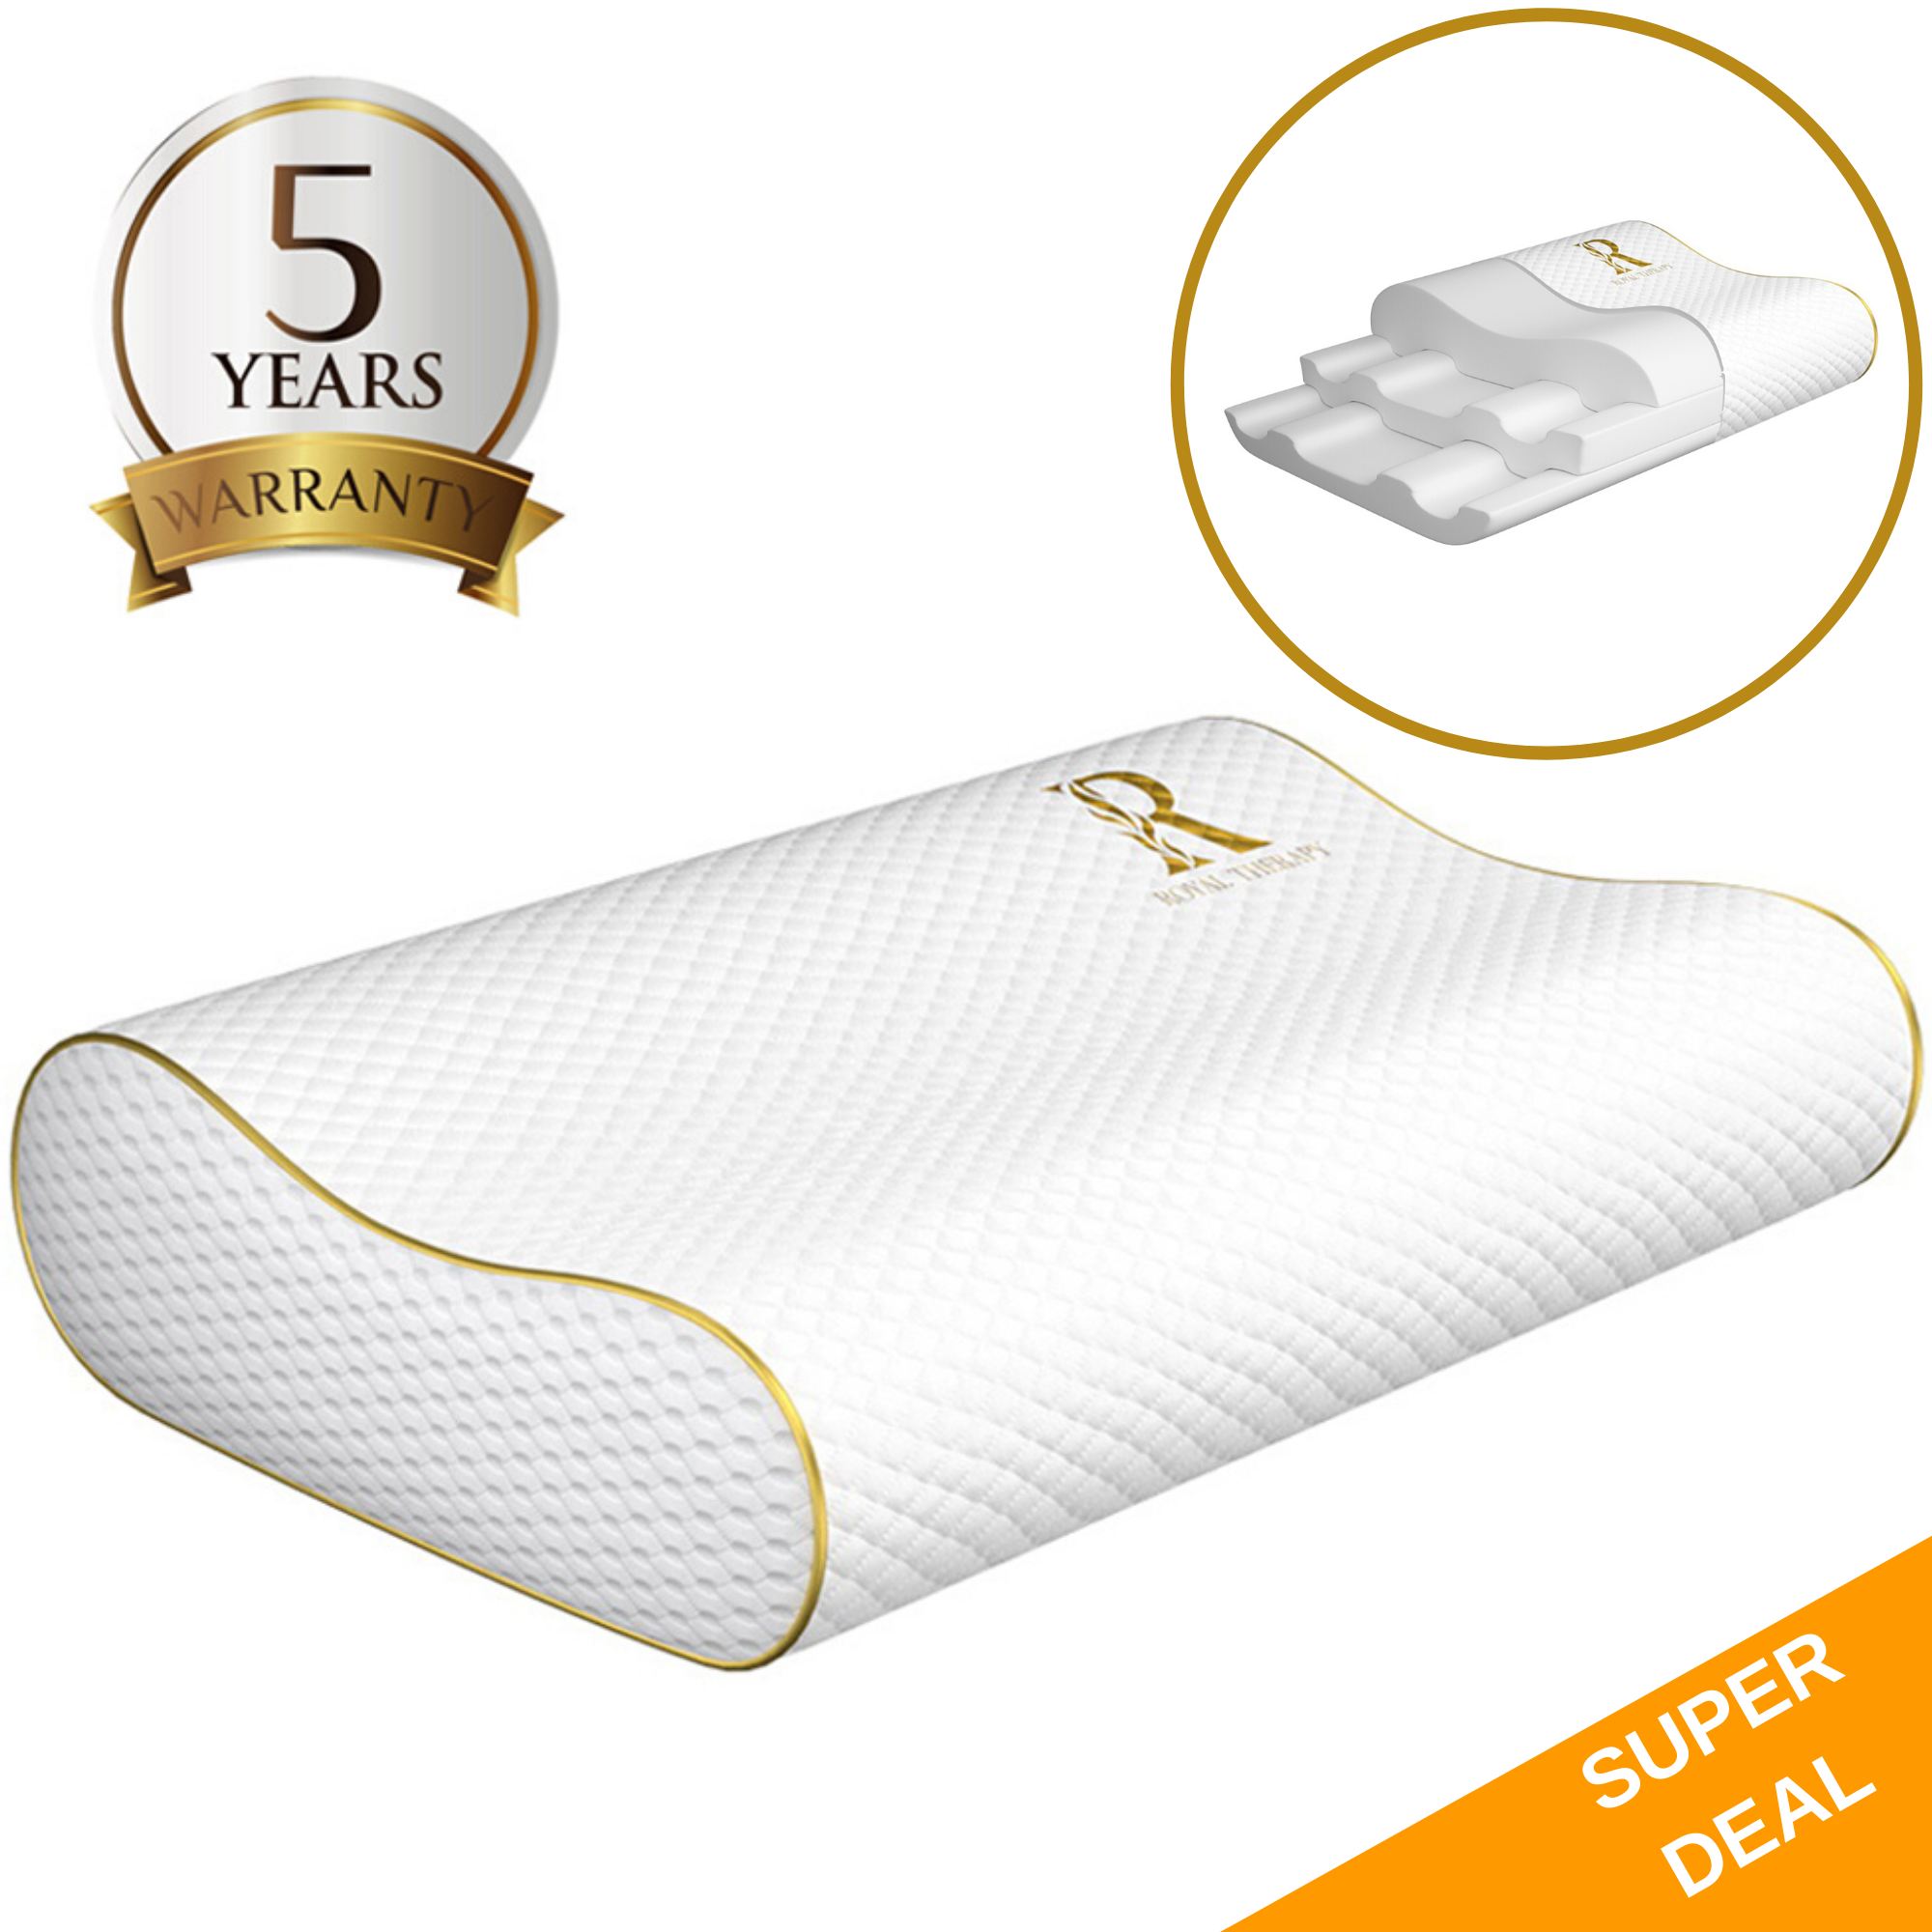 Royal Therapy Queen Memory Foam Contour Pillow, White Bed Pillow for Adult Neck & Shoulder, 3 lb - image 1 of 6